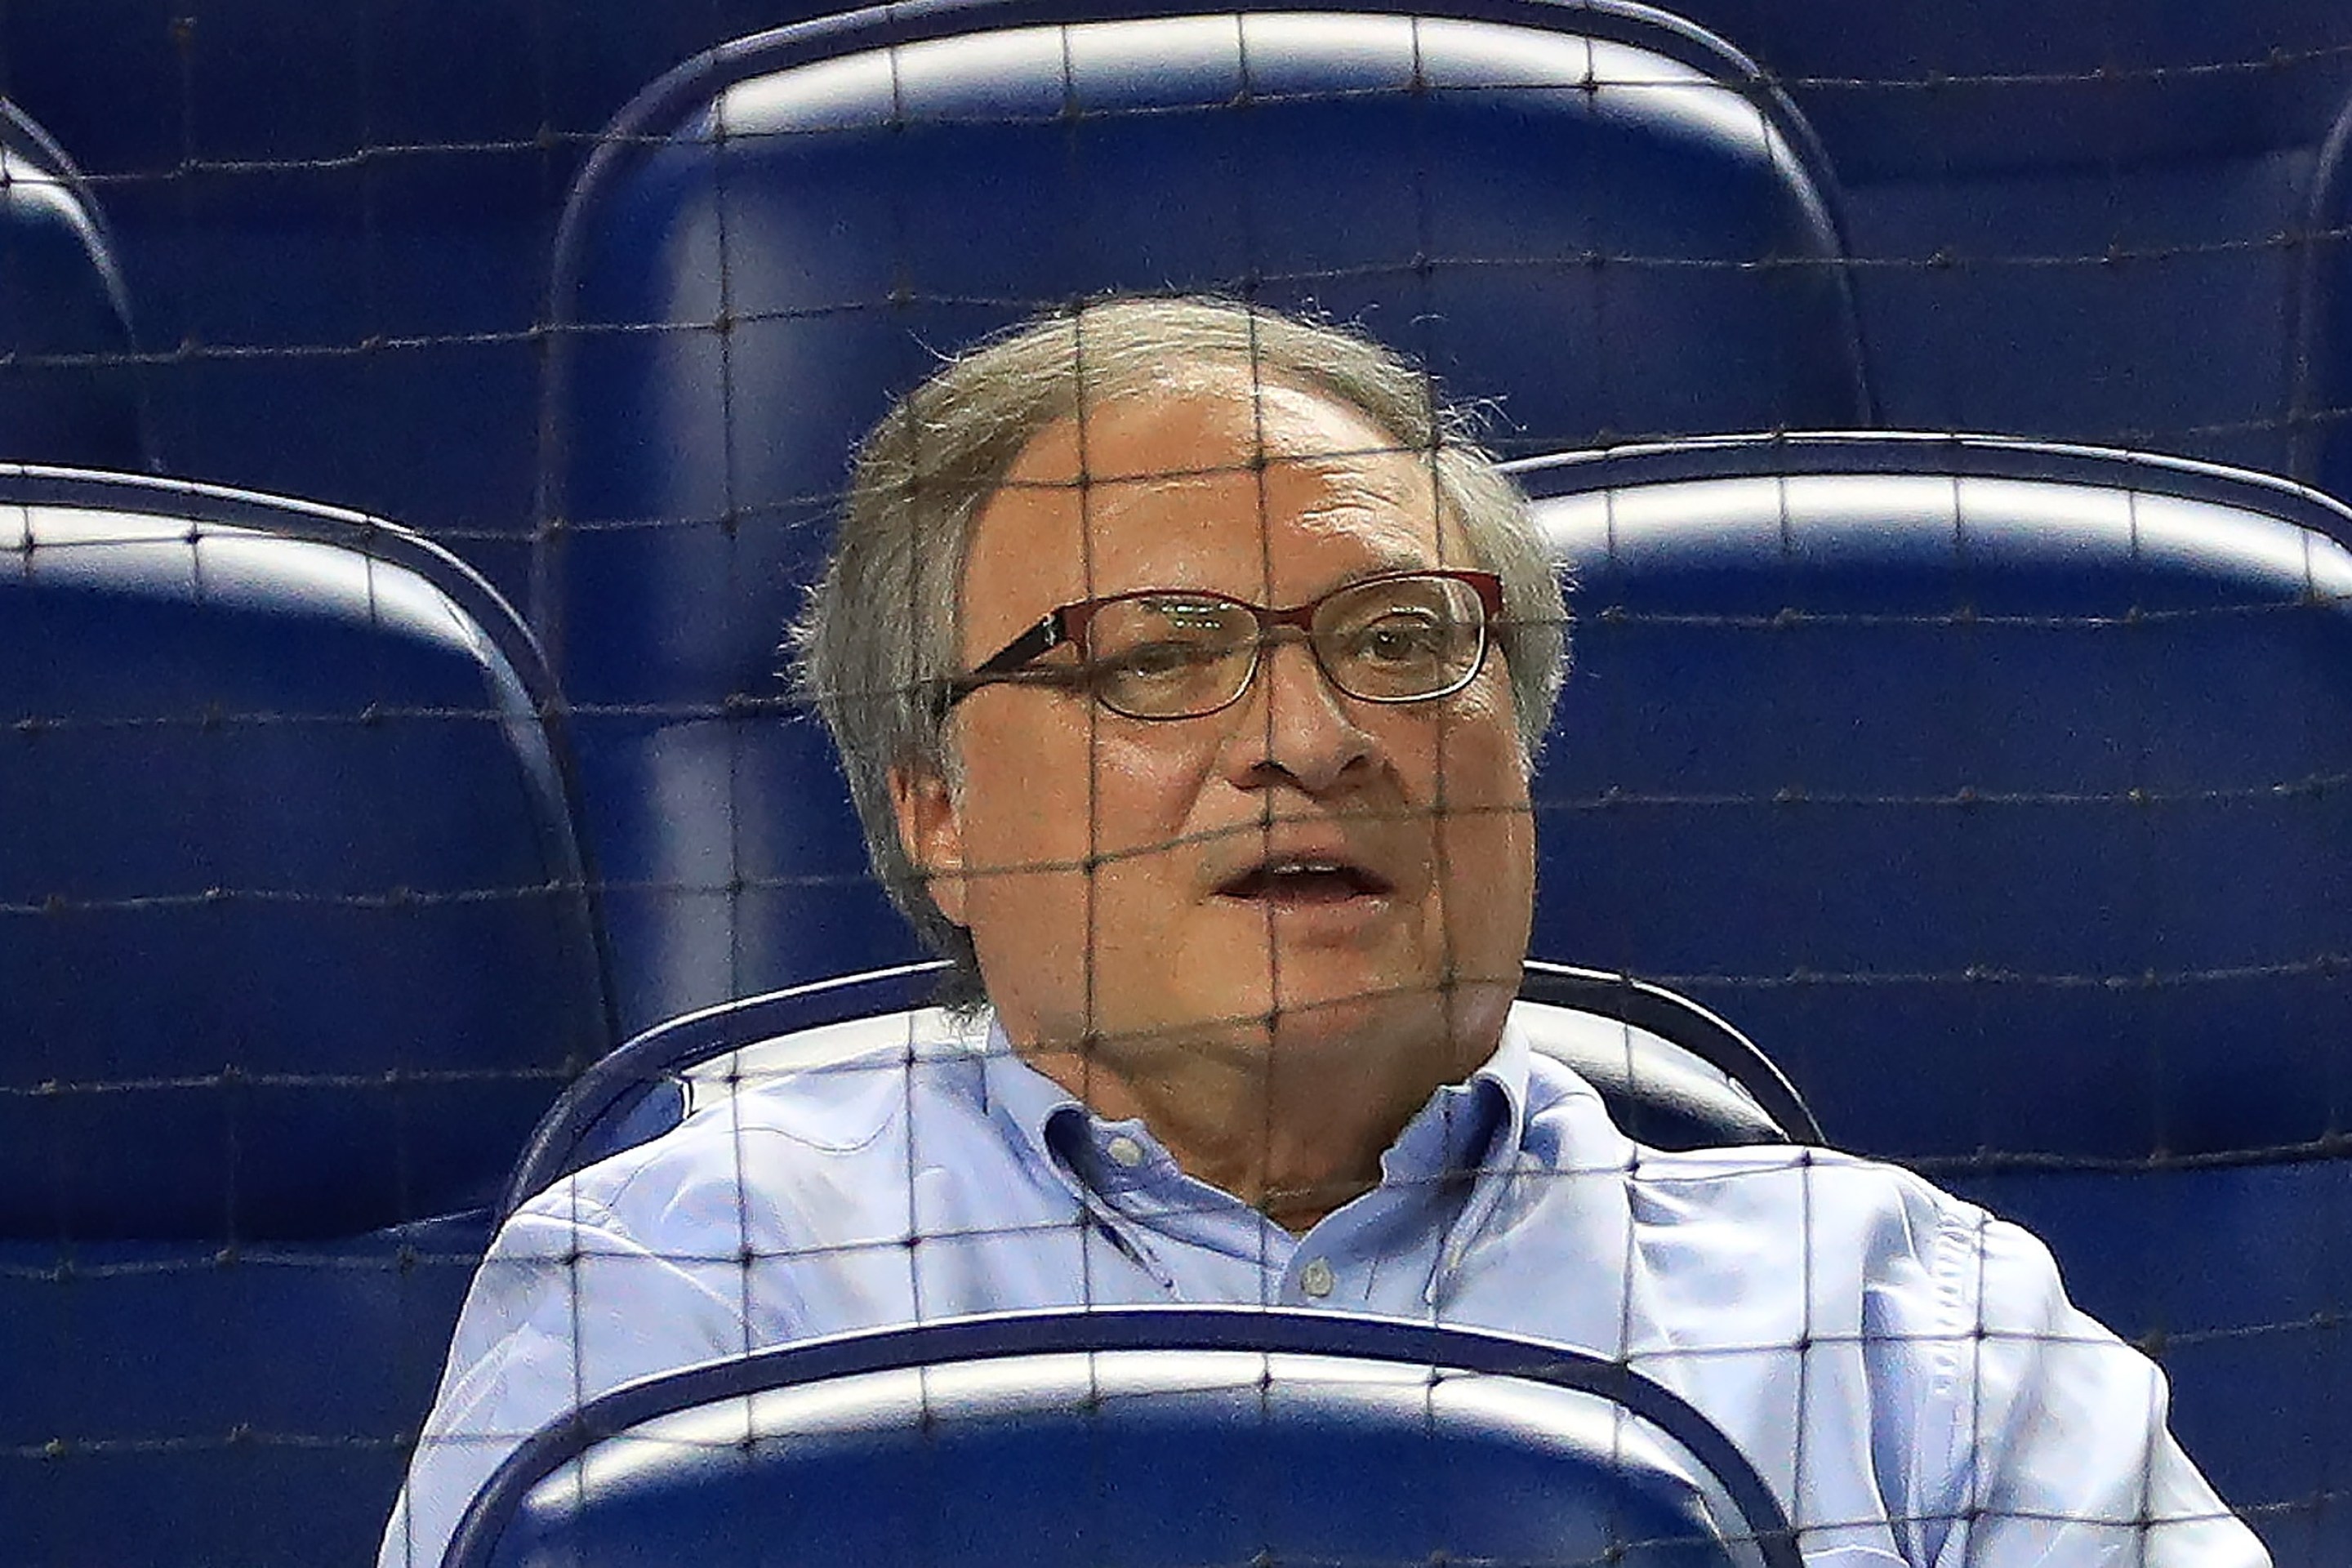 Miami Marlins owner Jeffery Loria looks on during a game against the New York Mets at Marlins Park on June 27, 2017.